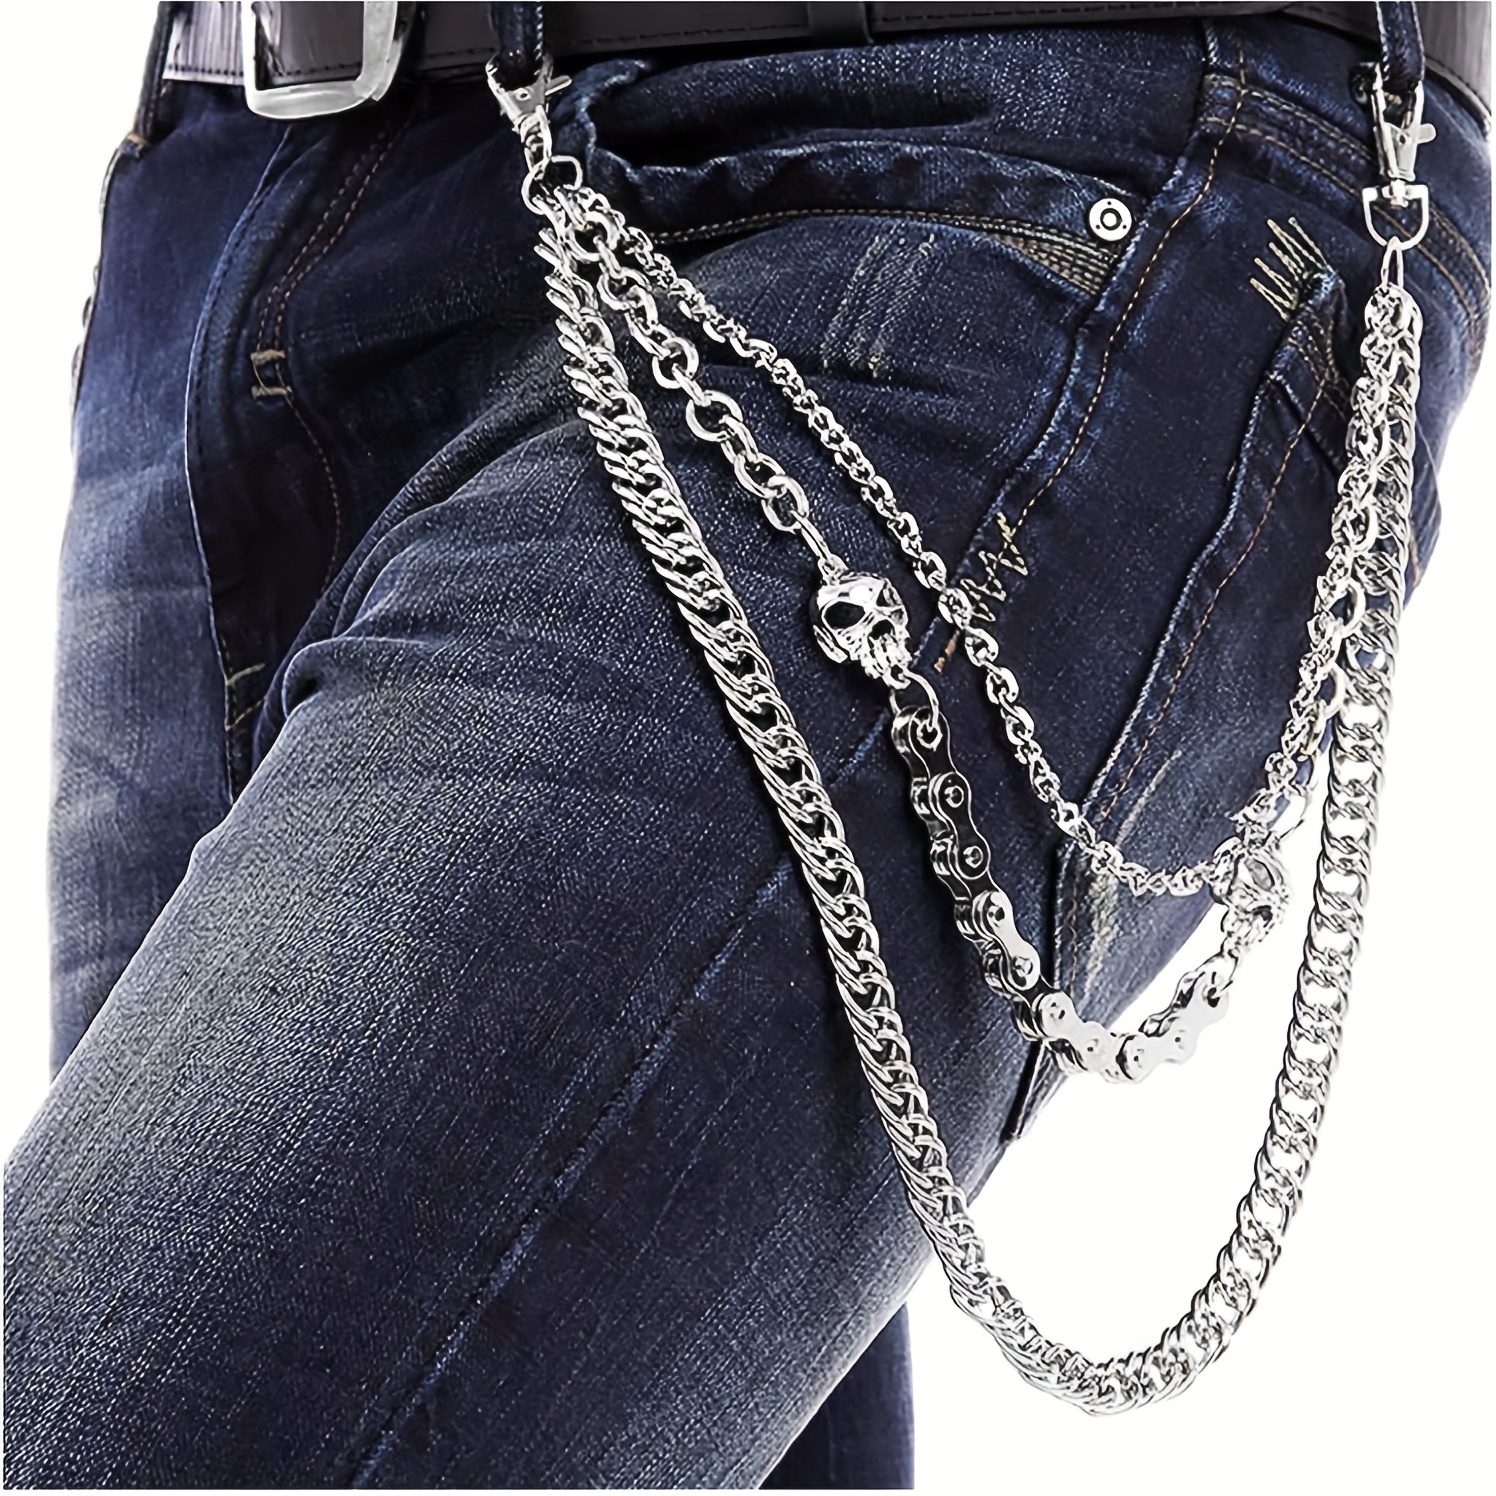 DENIM PANTS WITH CHAIN  Jeans with chains, Jeans chain, Fashion